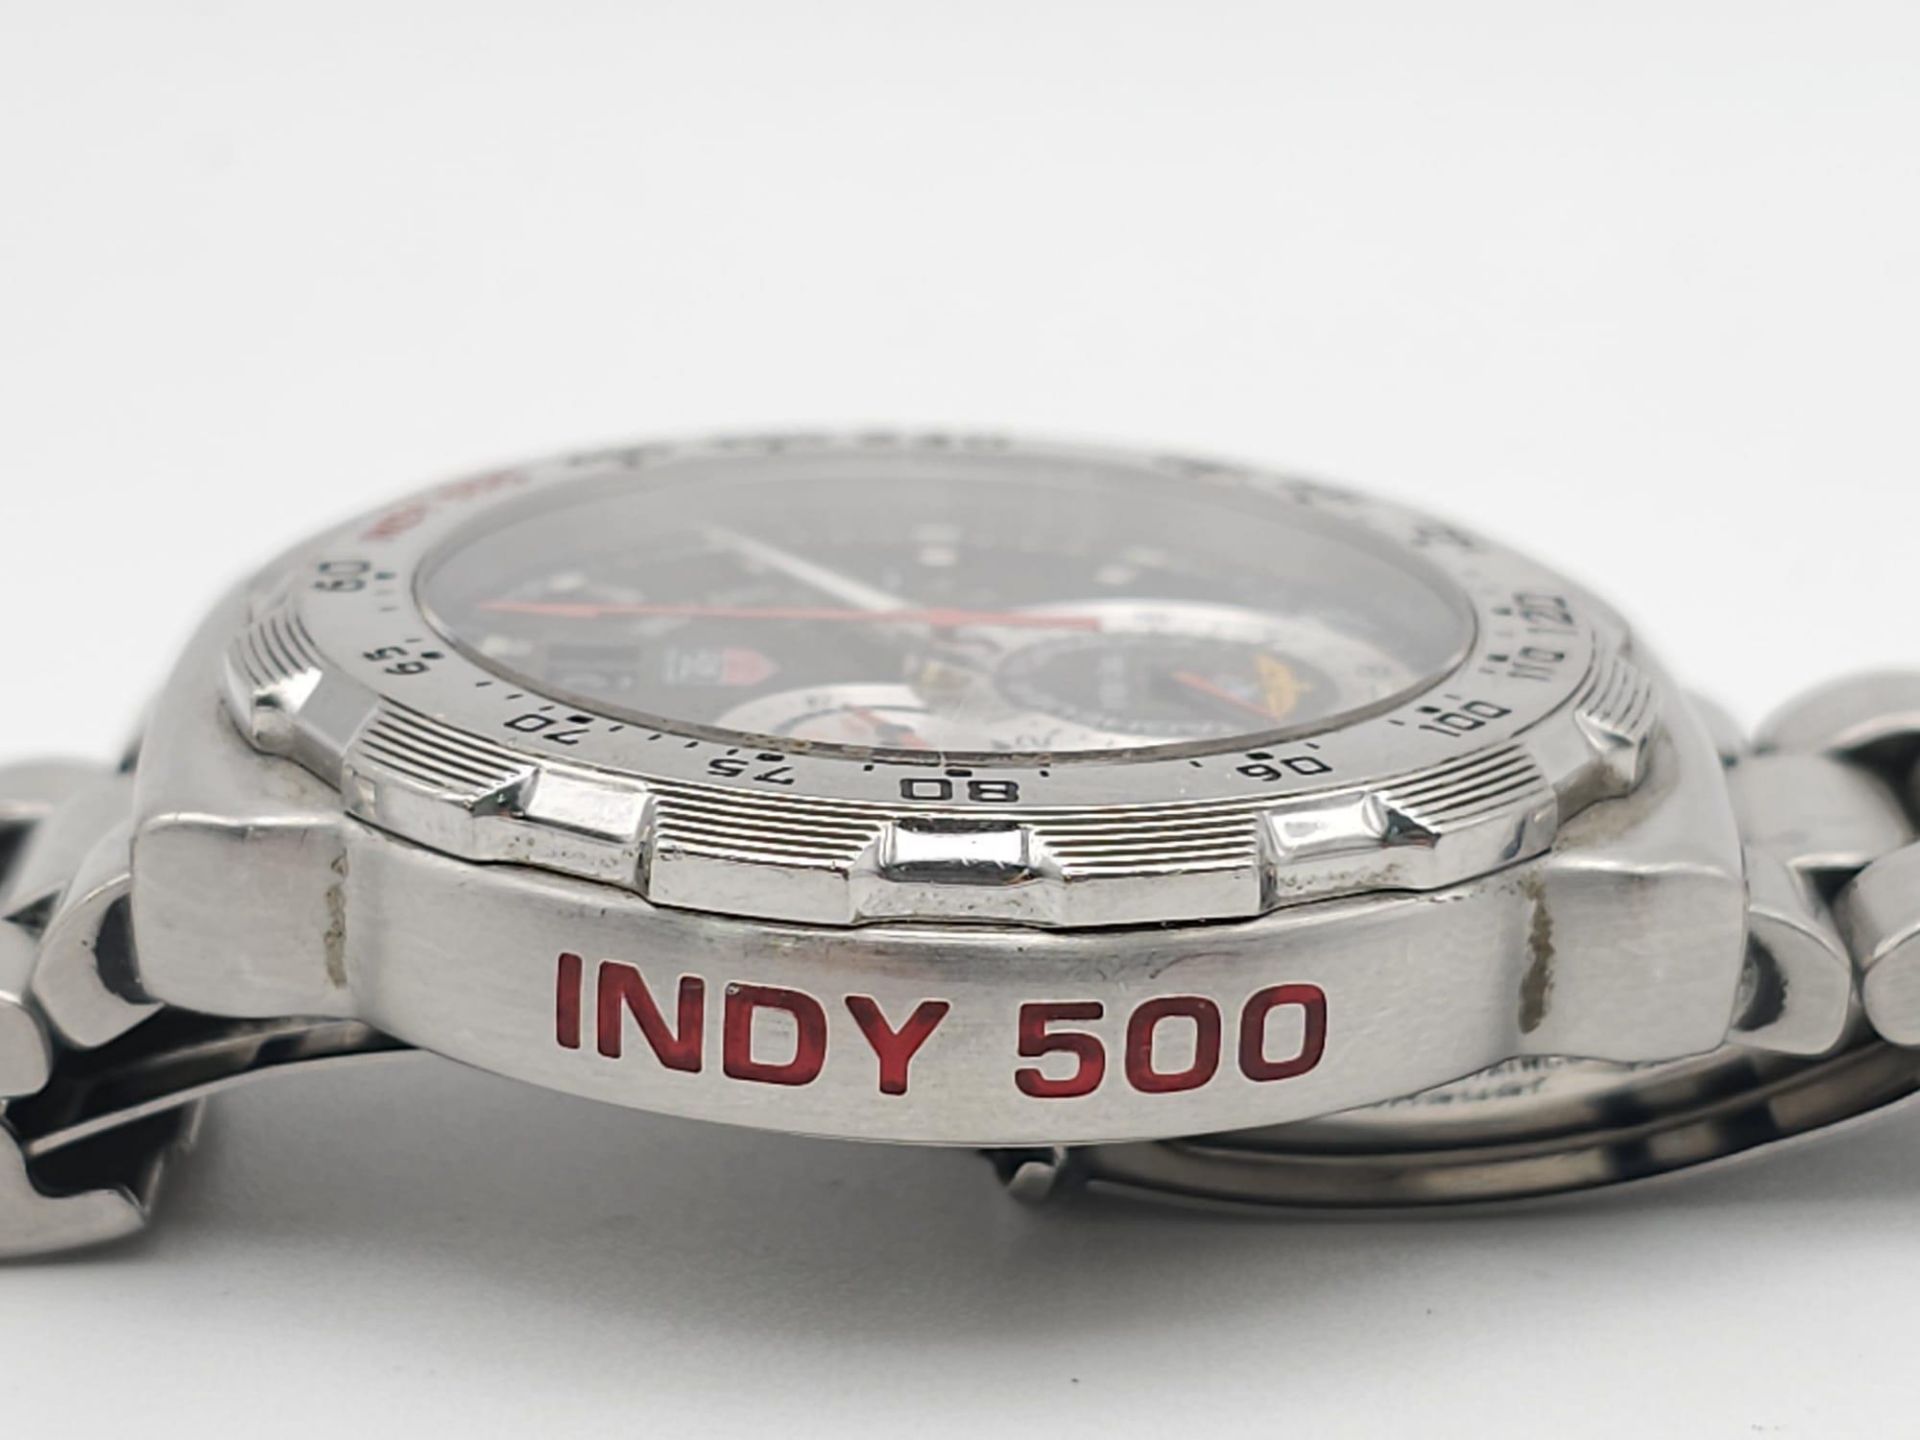 A TAG HEUER "FORMULA 1" INDY 500 QUARTZ GENTS WATCH IN STAINLESS STEEL . 45mm A REALLY GOOD - Image 10 of 11